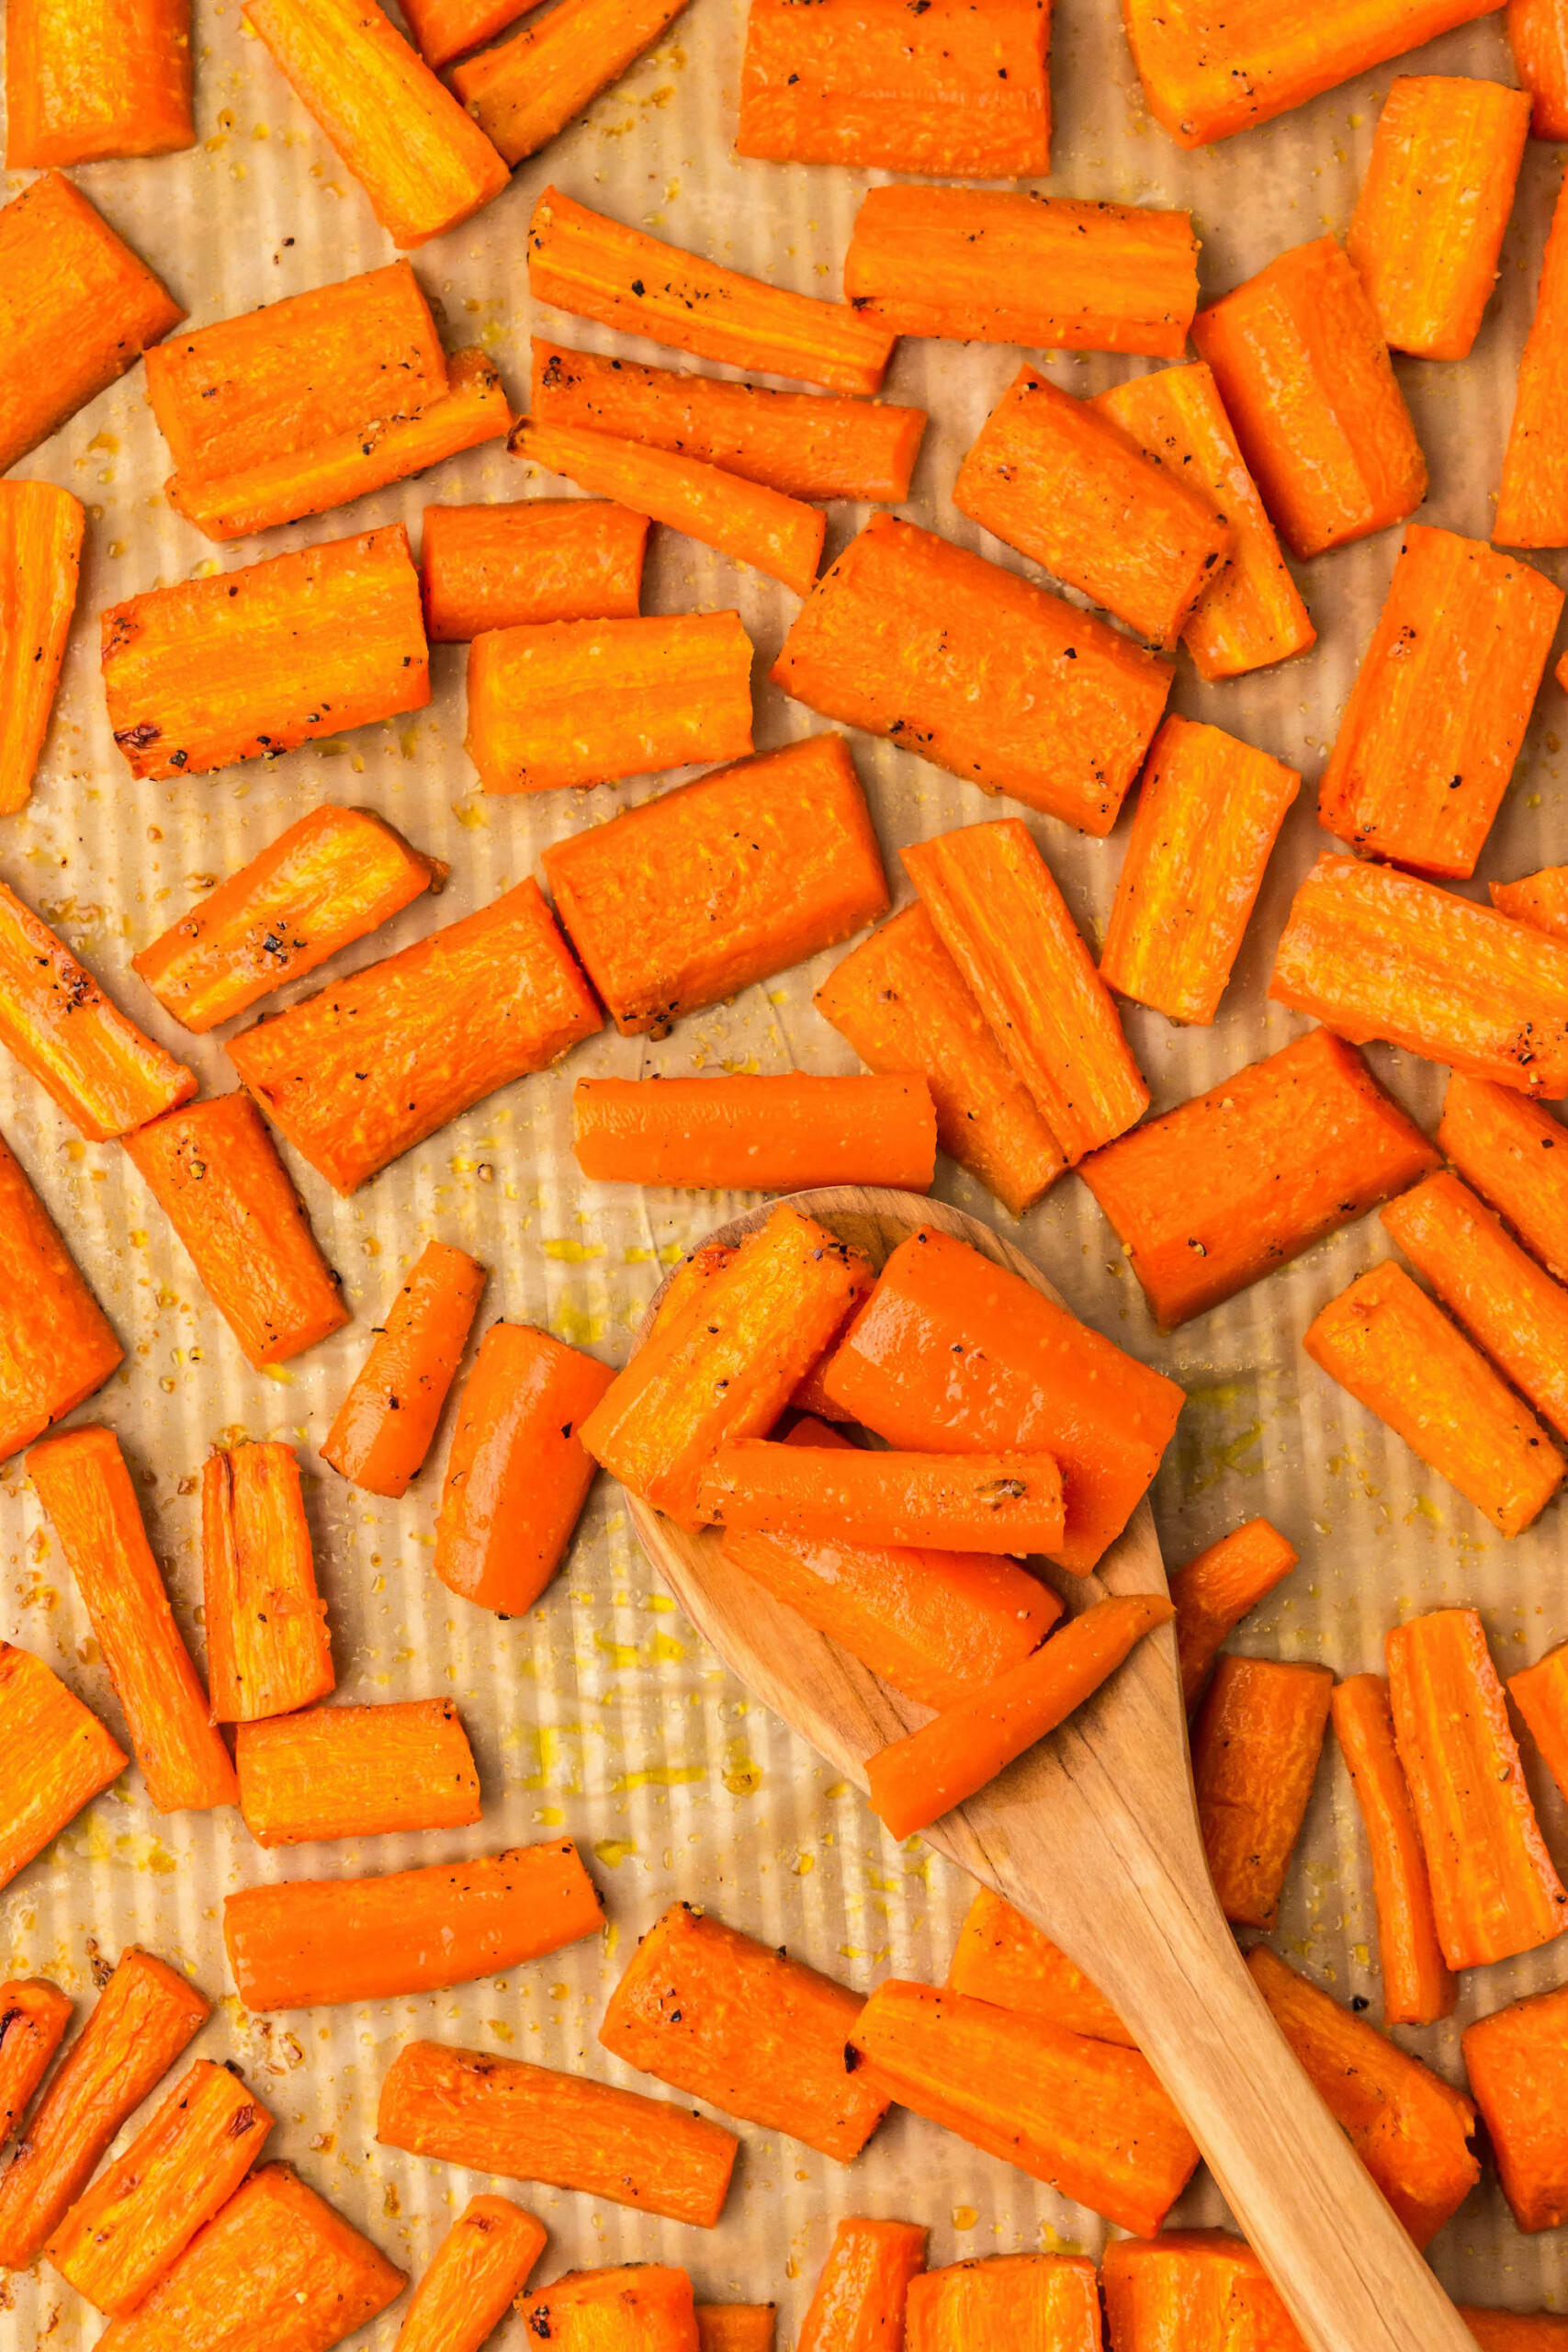 Honey glazed carrots on a baking sheet lined with parchment paper with a wooden spoon scooping up a serving of roasted carrots.